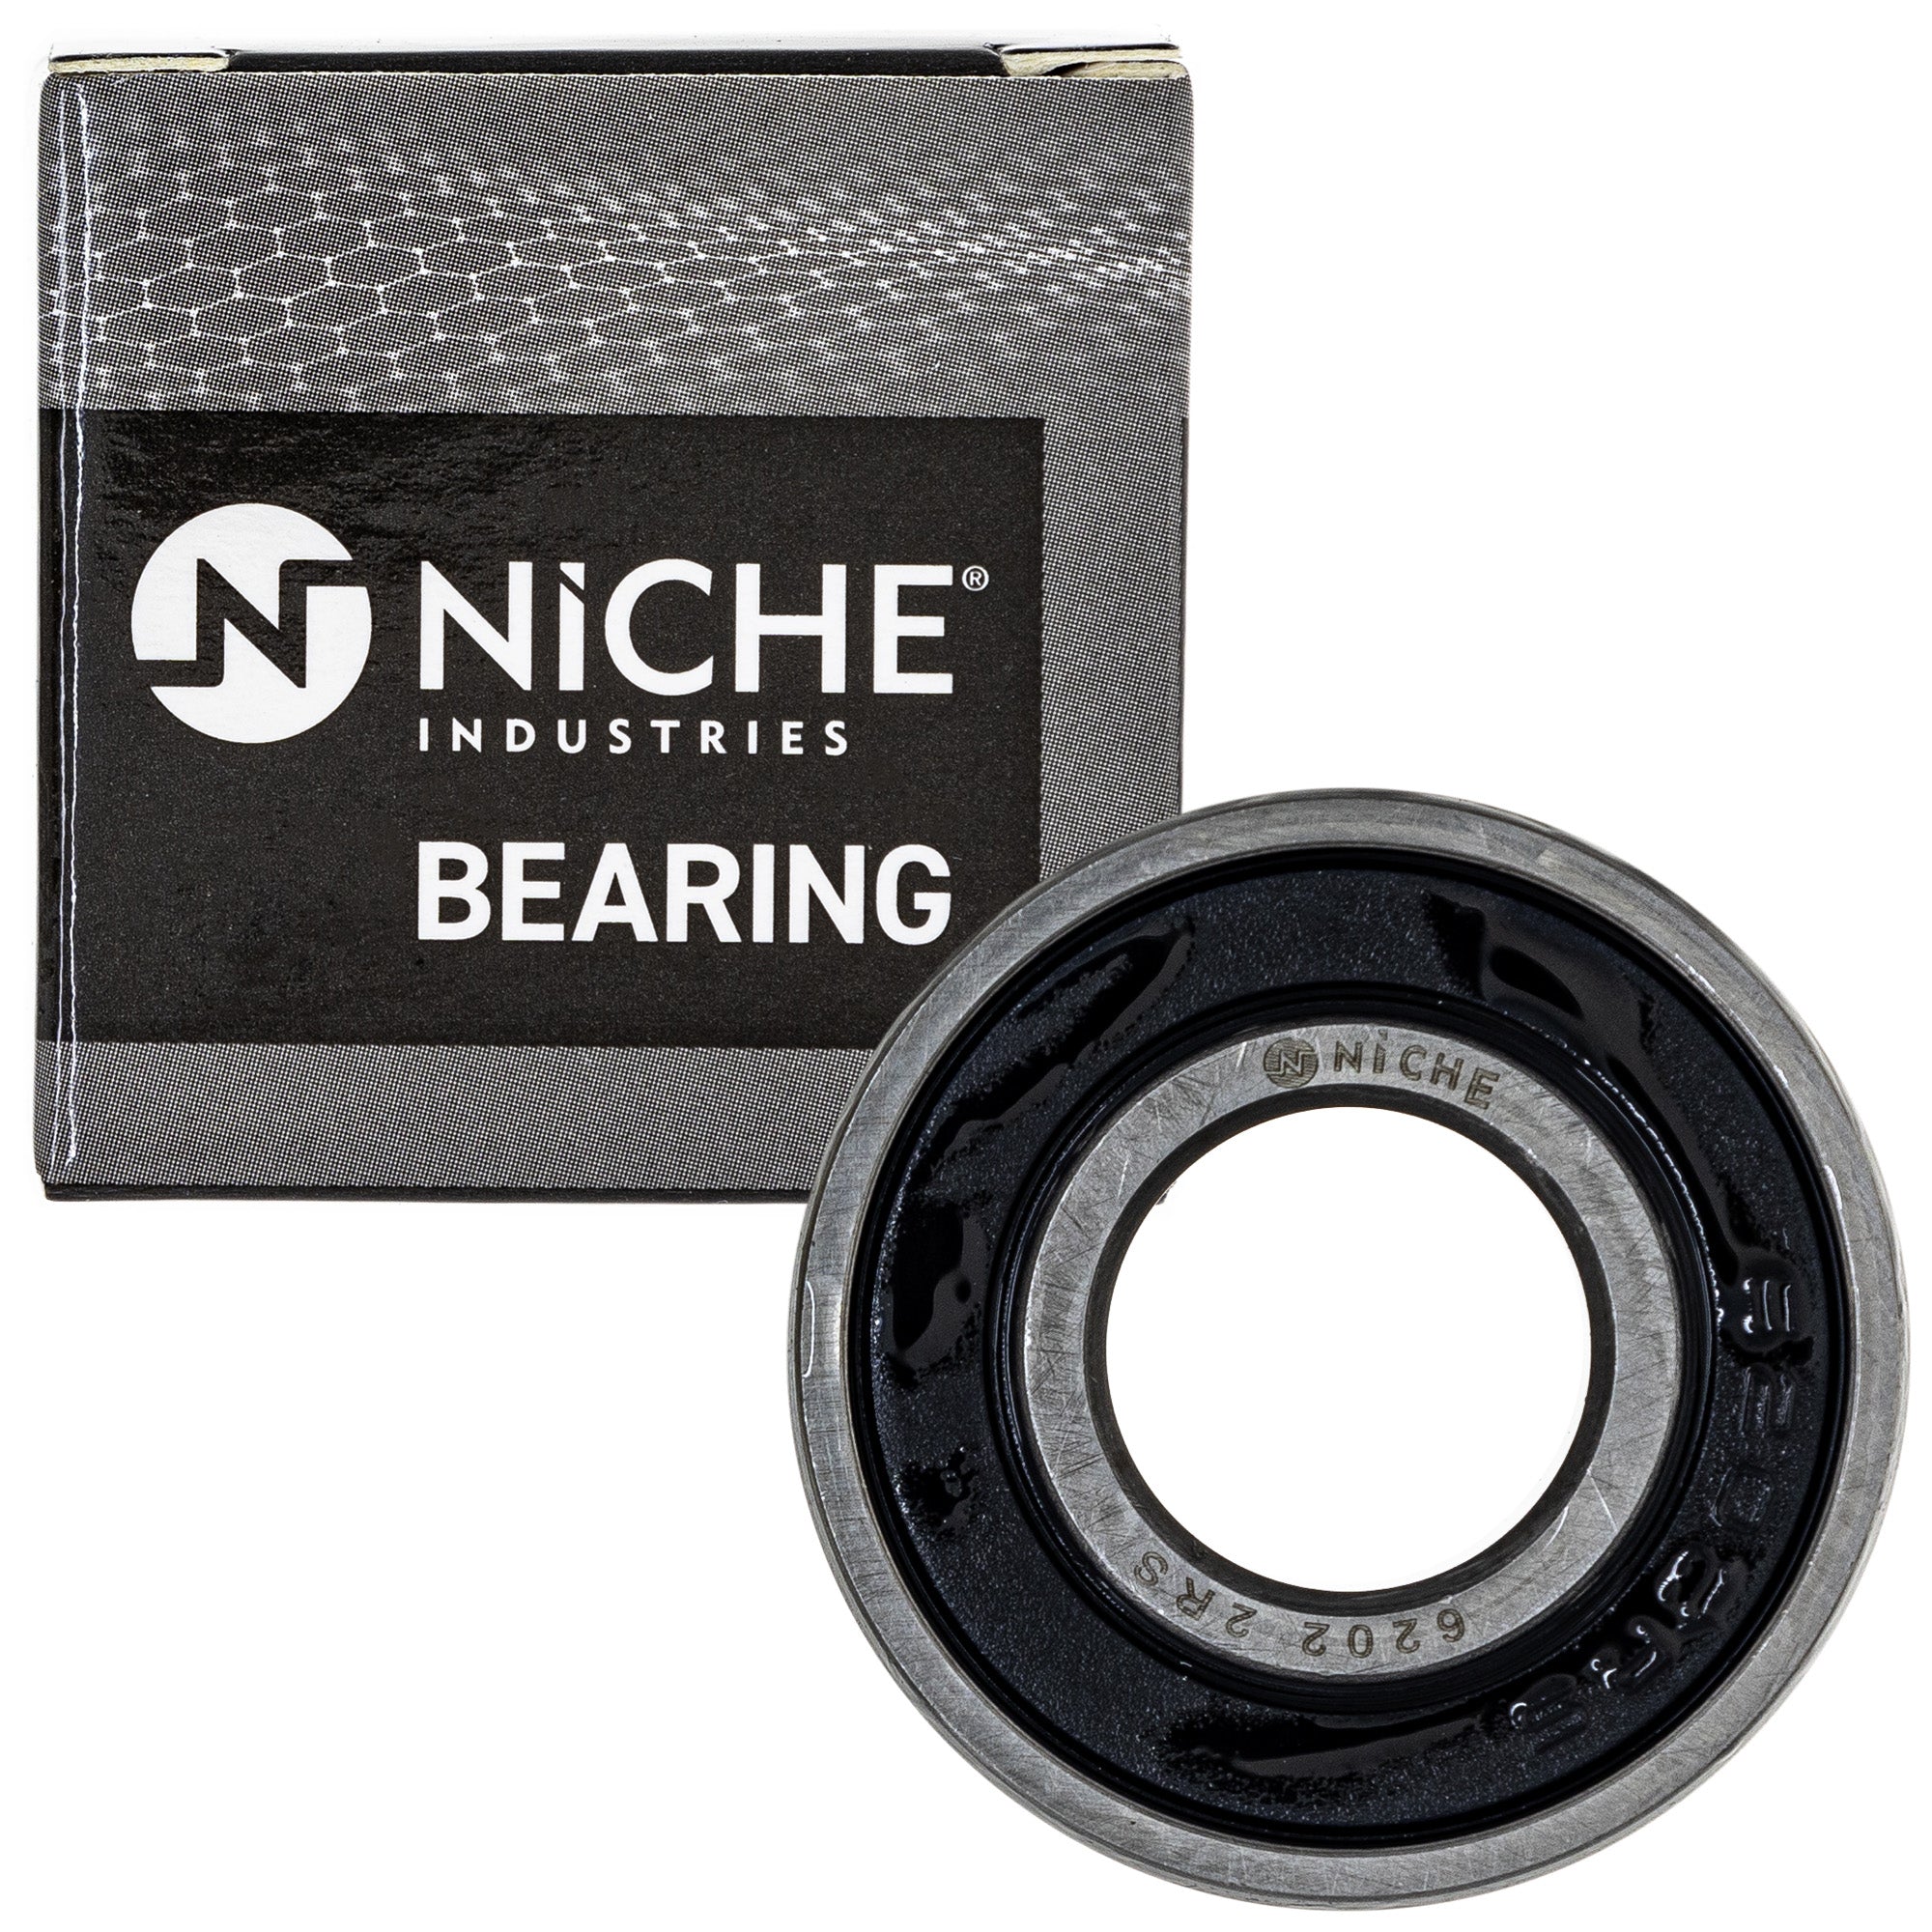 NICHE MK1009122 Wheel Bearing Seal Kit for zOTHER Ref No XT250